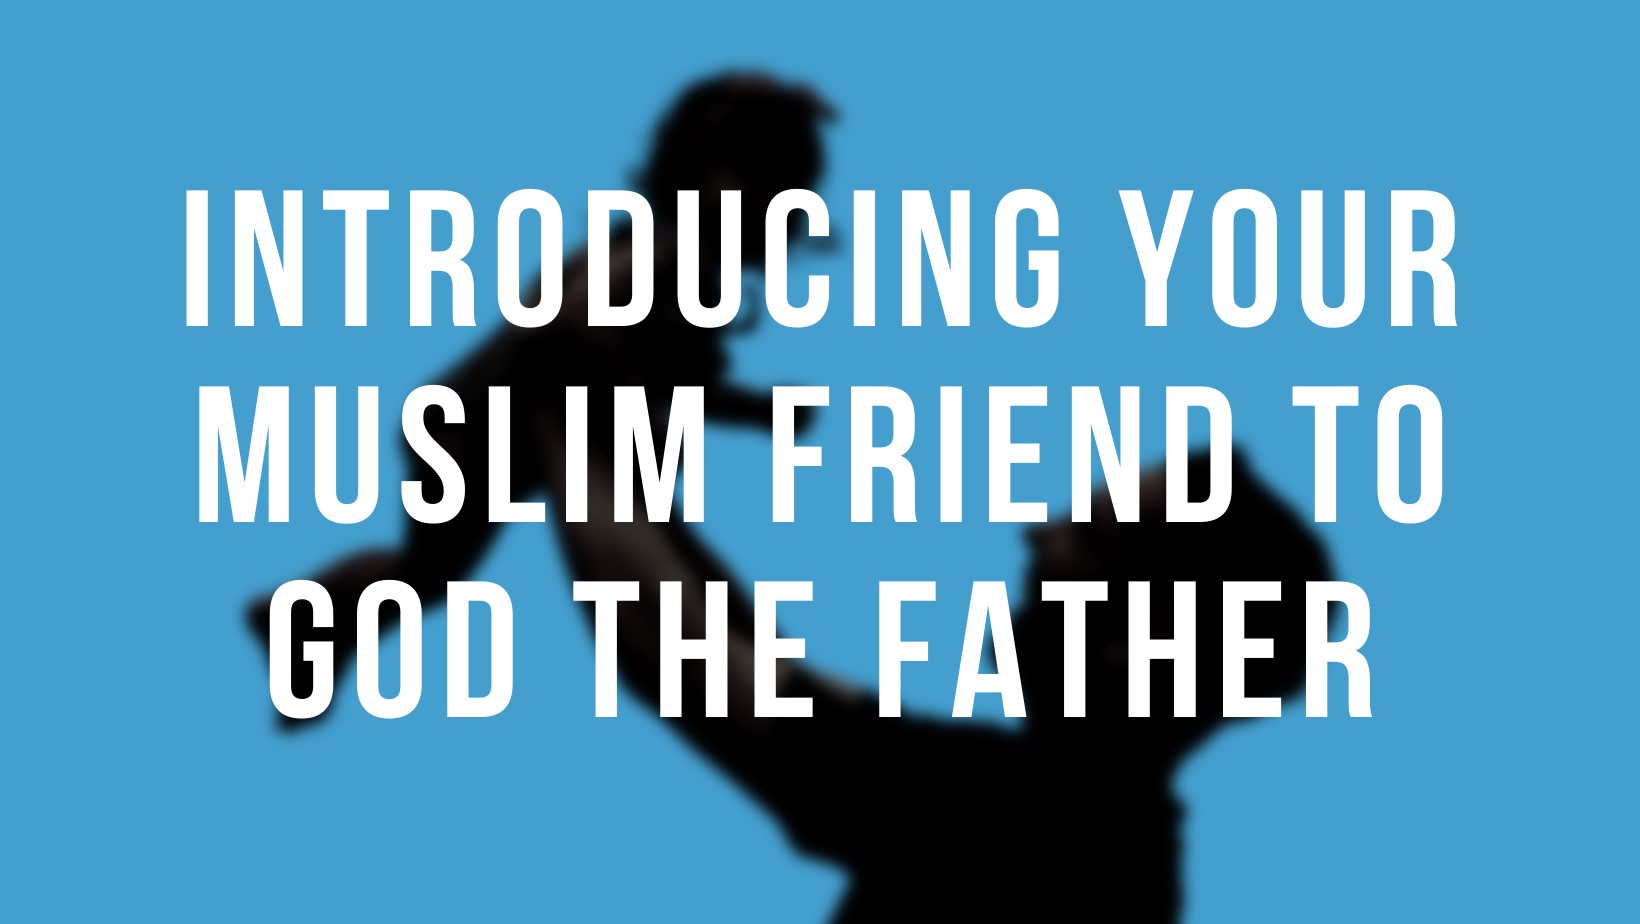 Introducing your Muslim friend to God the Father